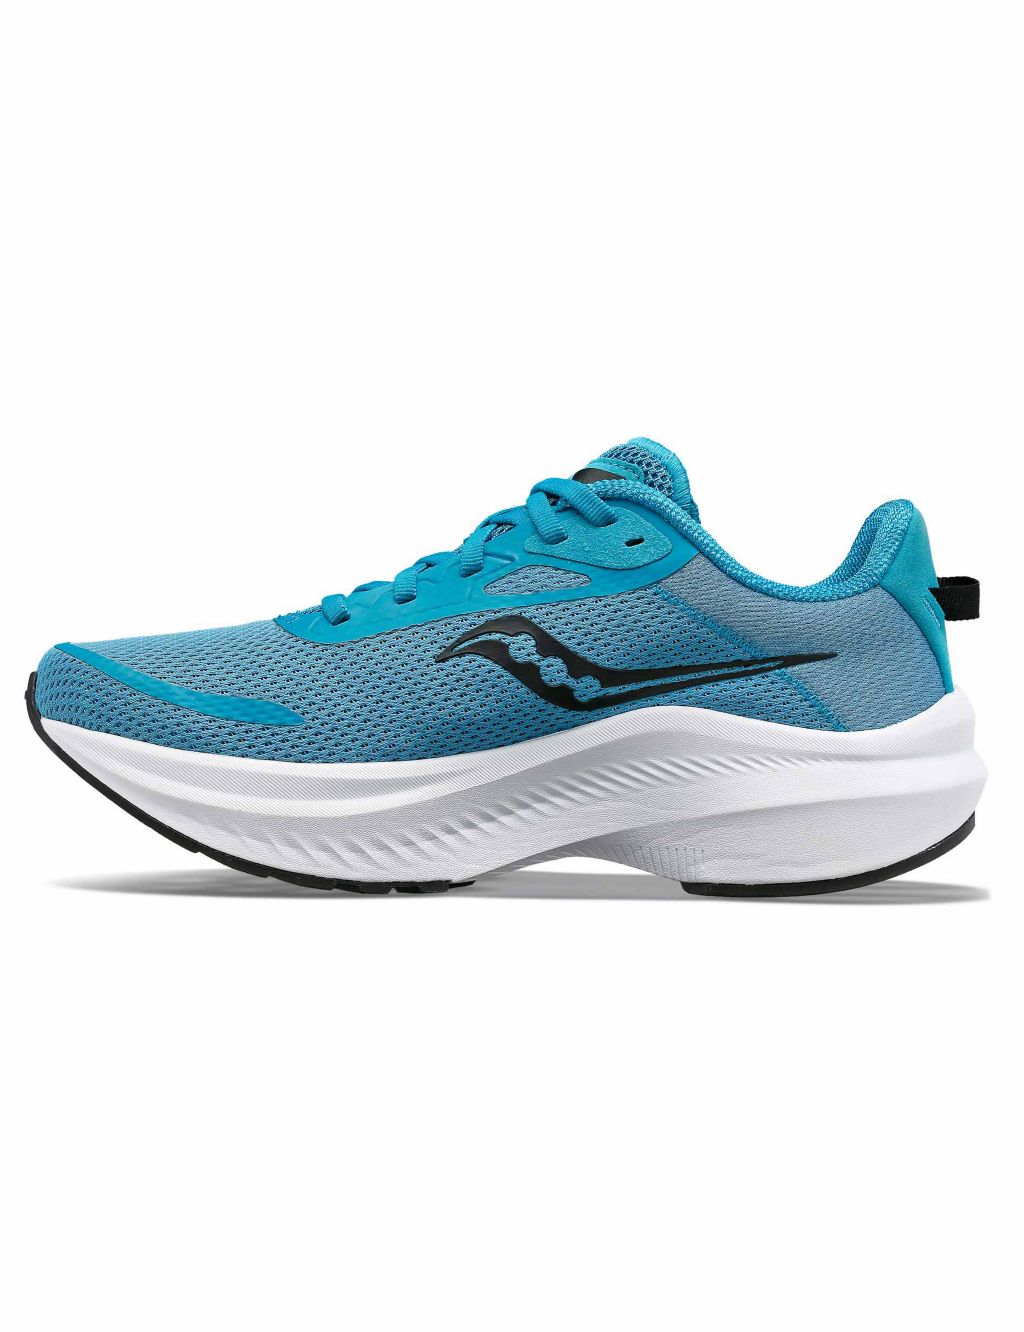 Axon 3 Trainers image 3